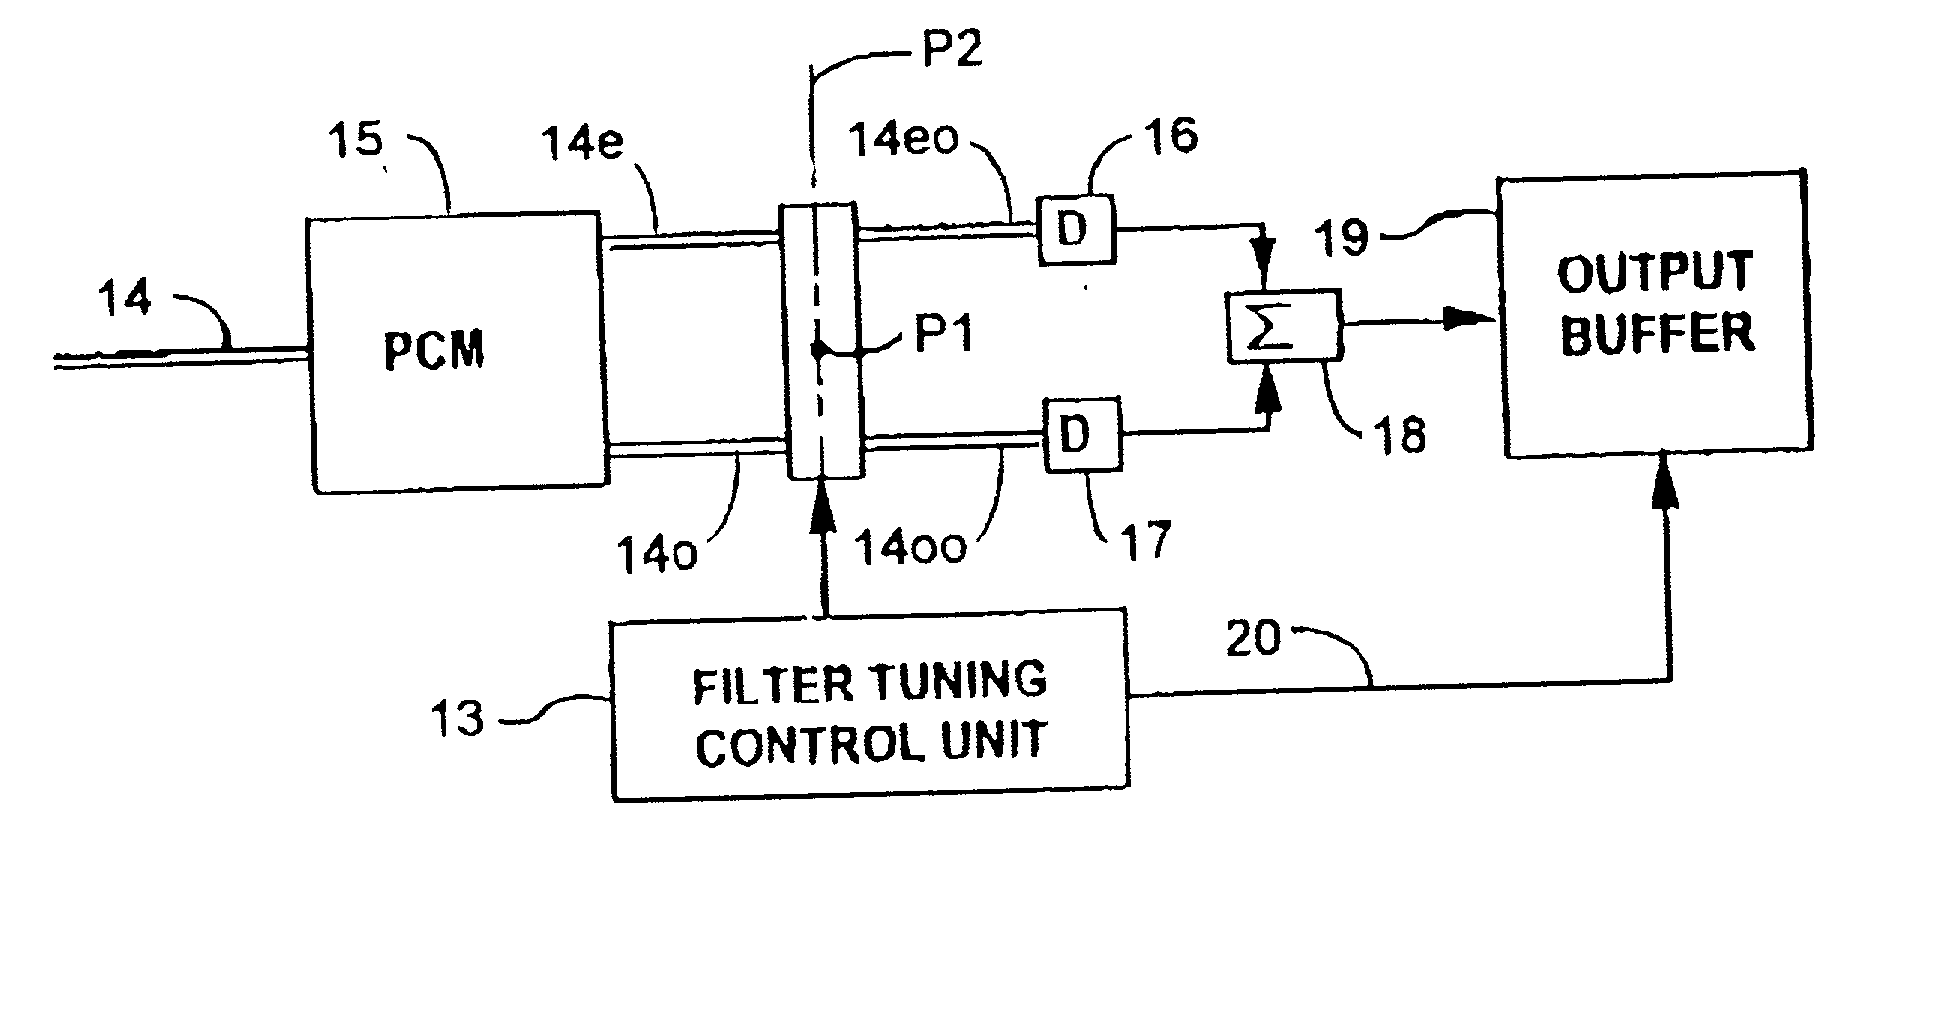 Multi-pass tunable optical filter using a polarization-dependent filter element; and multi-pass optics therefor